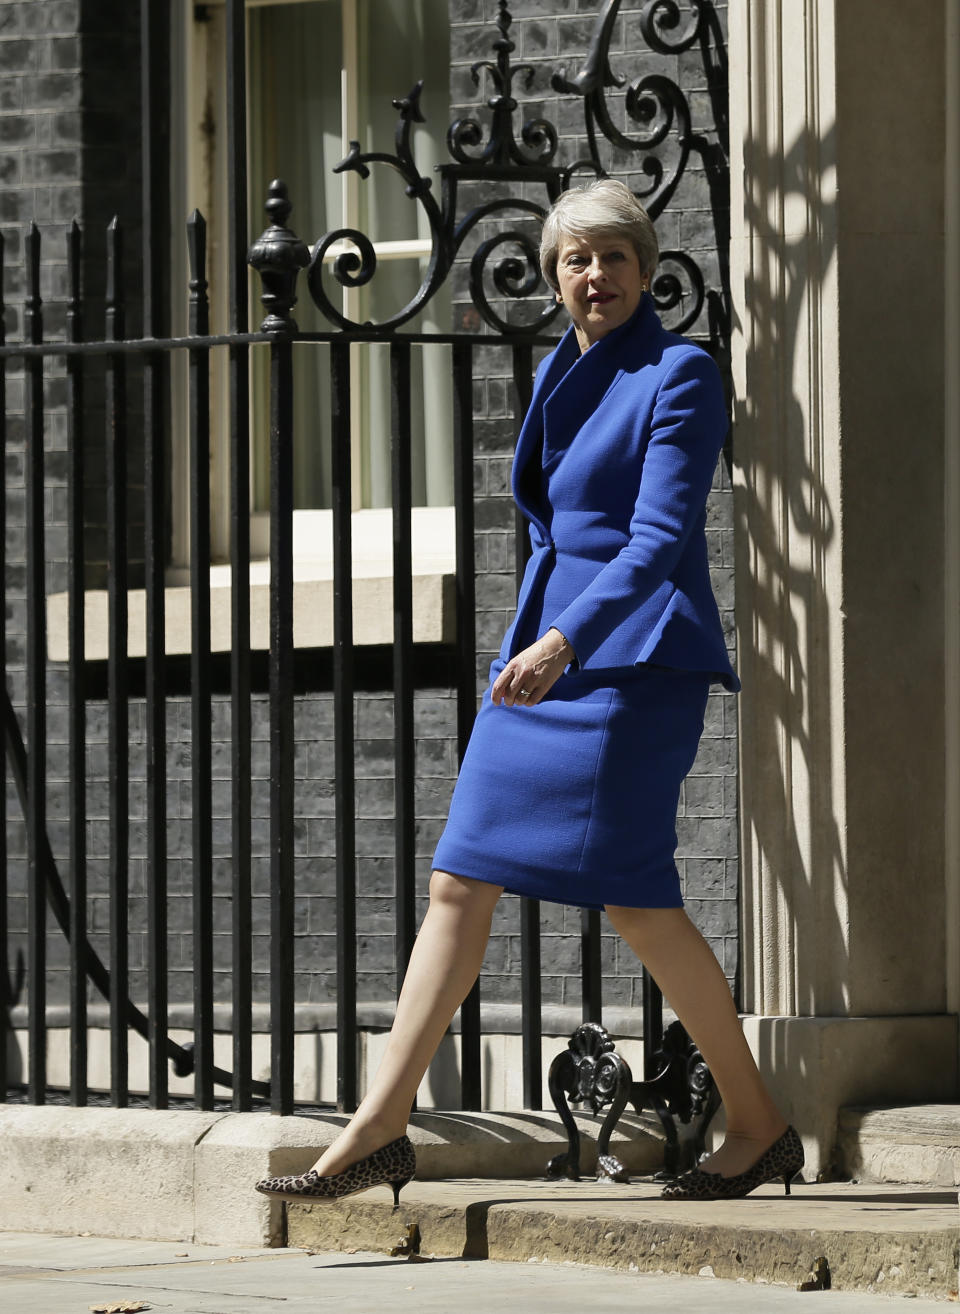 Britain's Prime Minister Theresa May prepares to face the media as she leaves 10 Downing Street, to visit Queen Elizabeth II where she will officially resign as Prime Minister, in London, Wednesday, July 24, 2019. Boris Johnson will replace May as Prime Minister later Wednesday. (AP Photo/Tim Ireland)